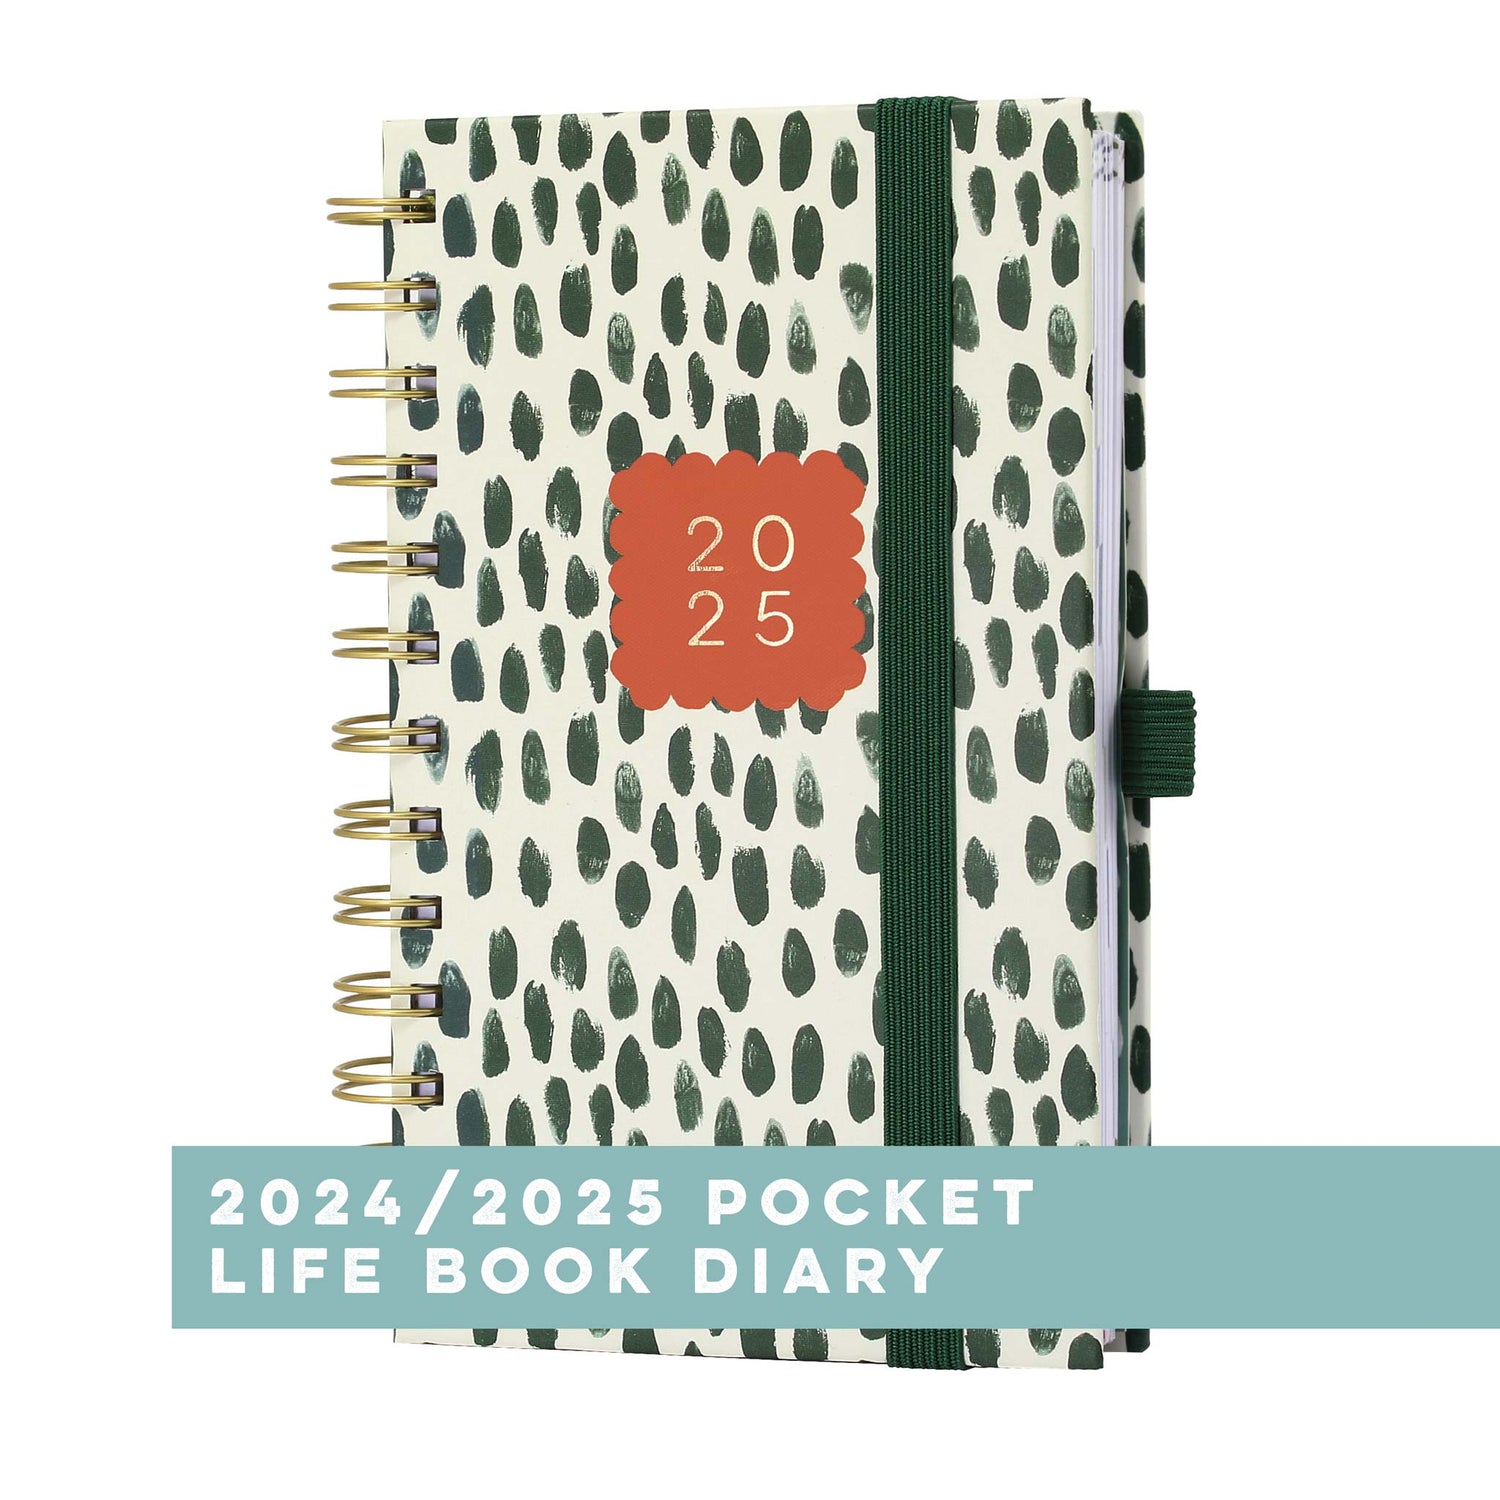 Boxclever Press Pocket Life Book Diary 2025 with a white and green spot design